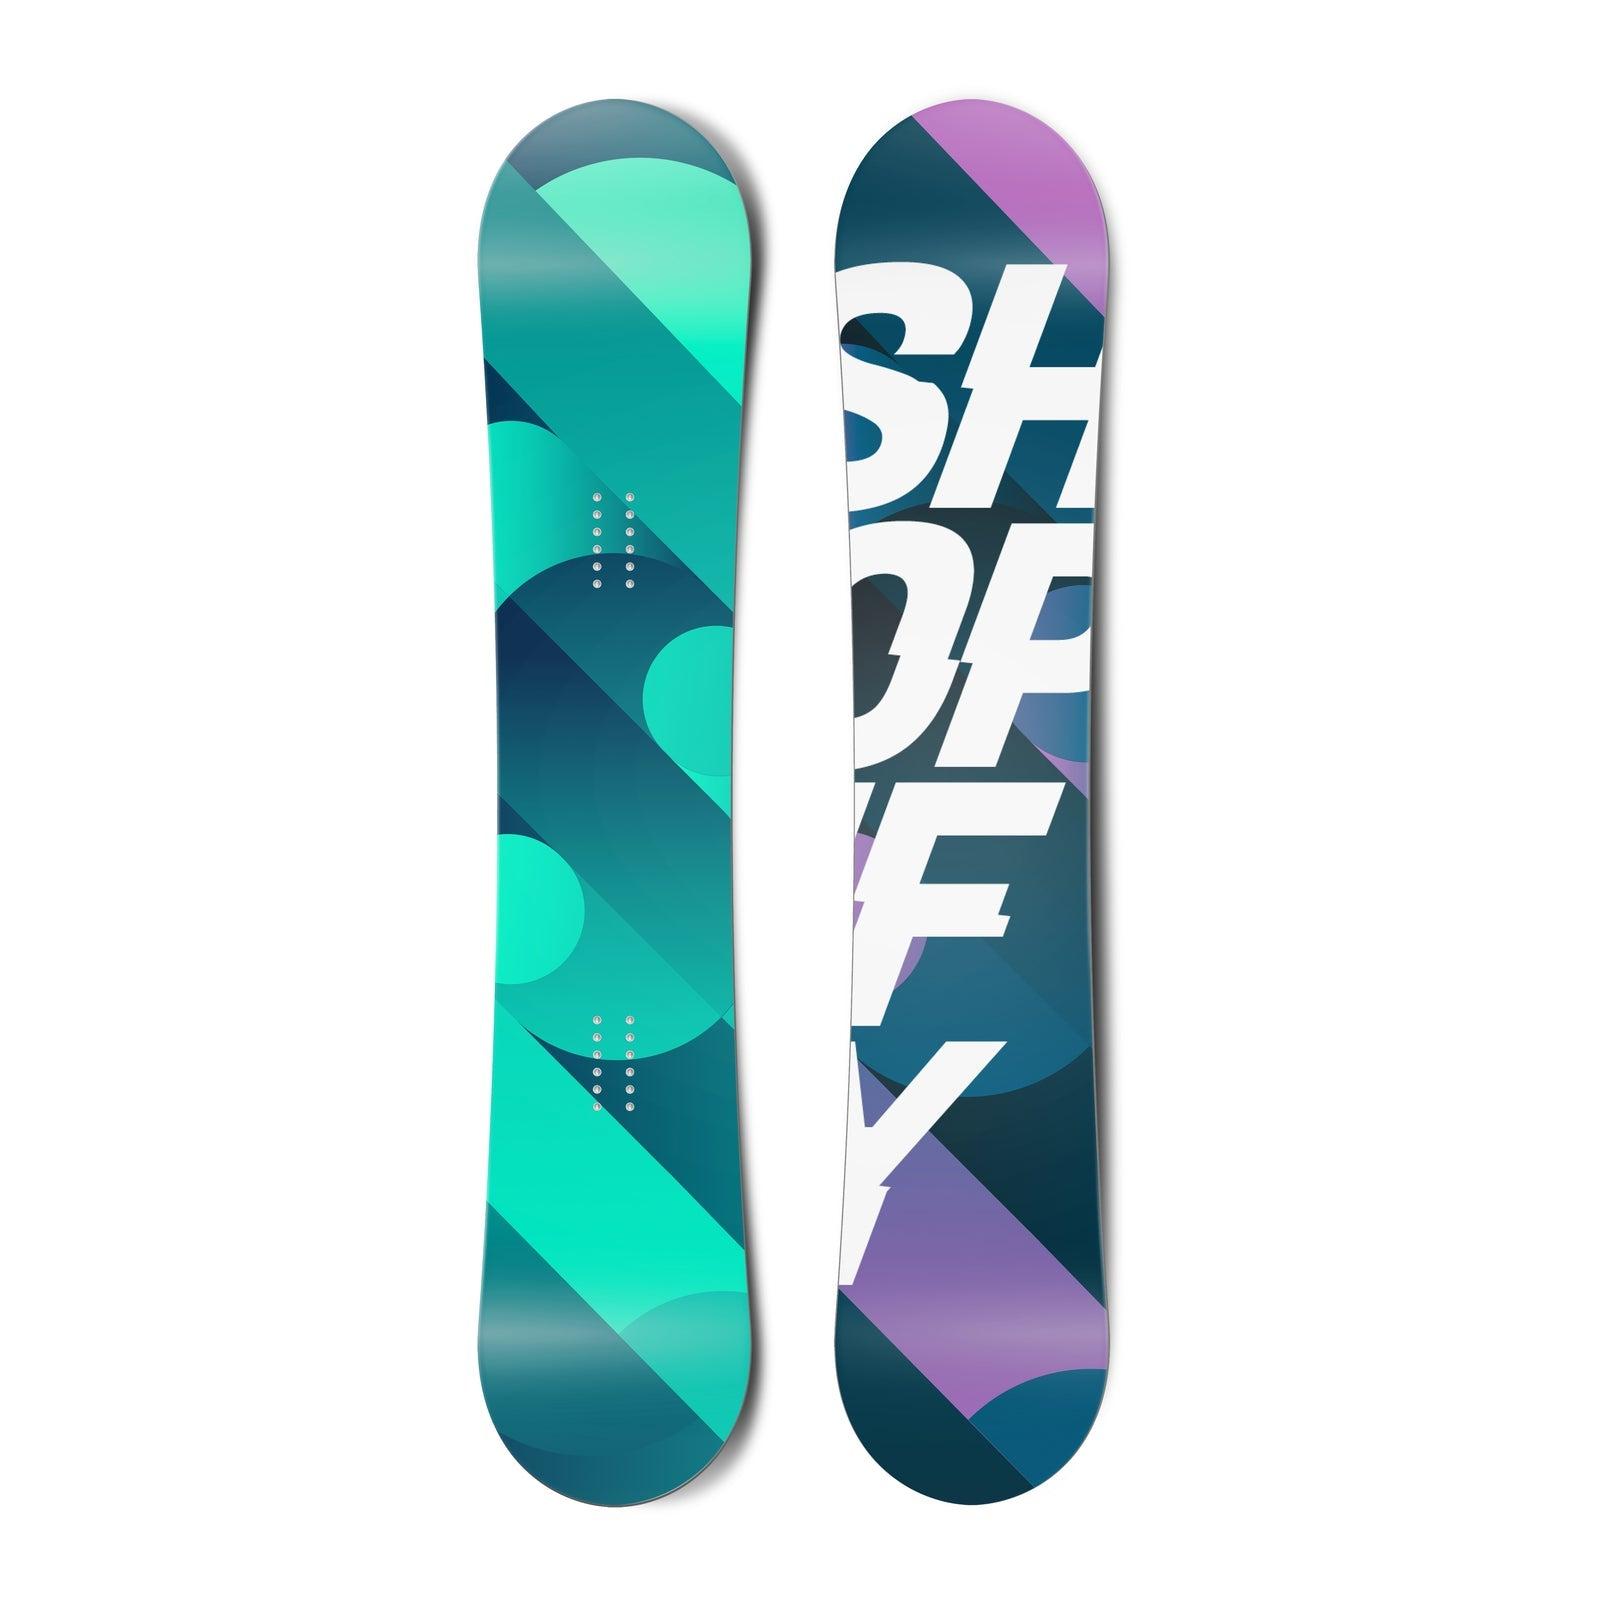 Top and bottom view of a snowboard. The top view shows abstract circles and lines in shades of teal.
          The bottom view shows abstract circles and lines in shades of purple and blue with the text “SHOPIFY” in a
          sans serif typeface on top.